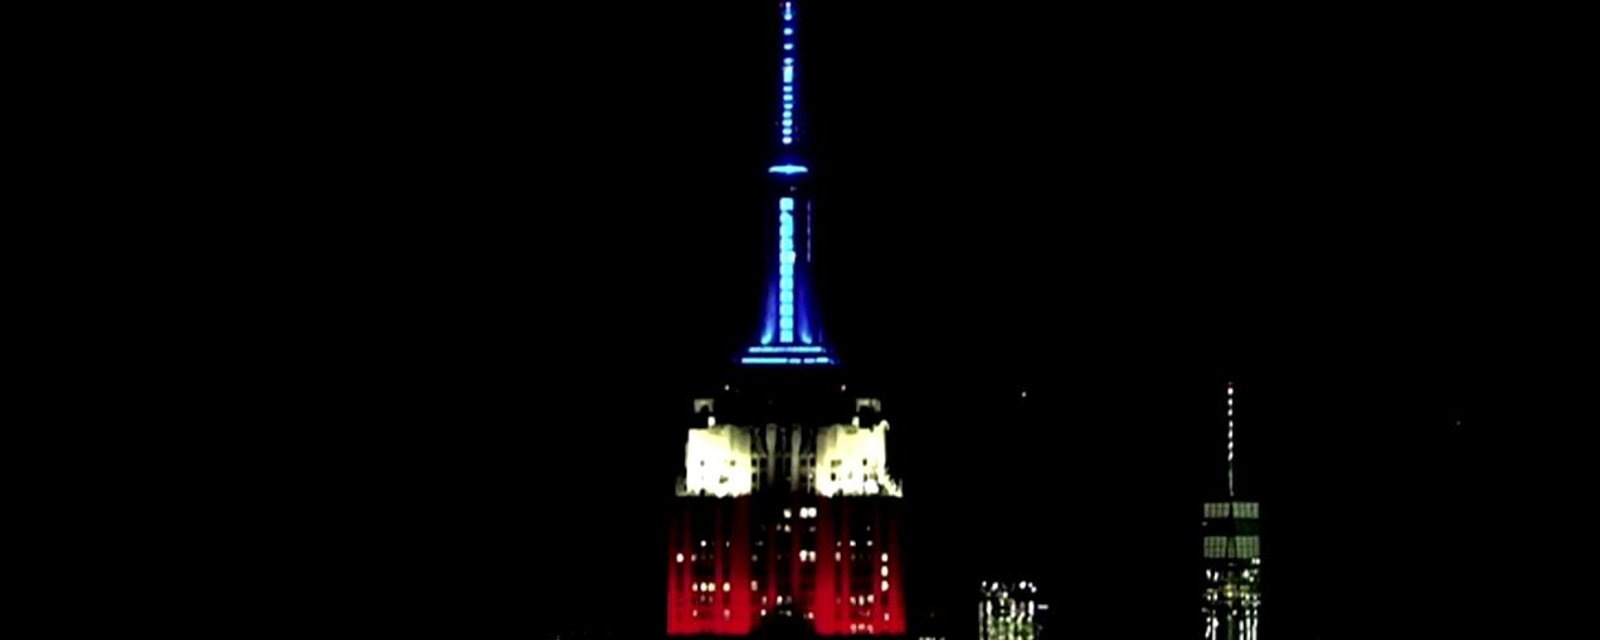 Rangers honored by Empire State Building light show! 